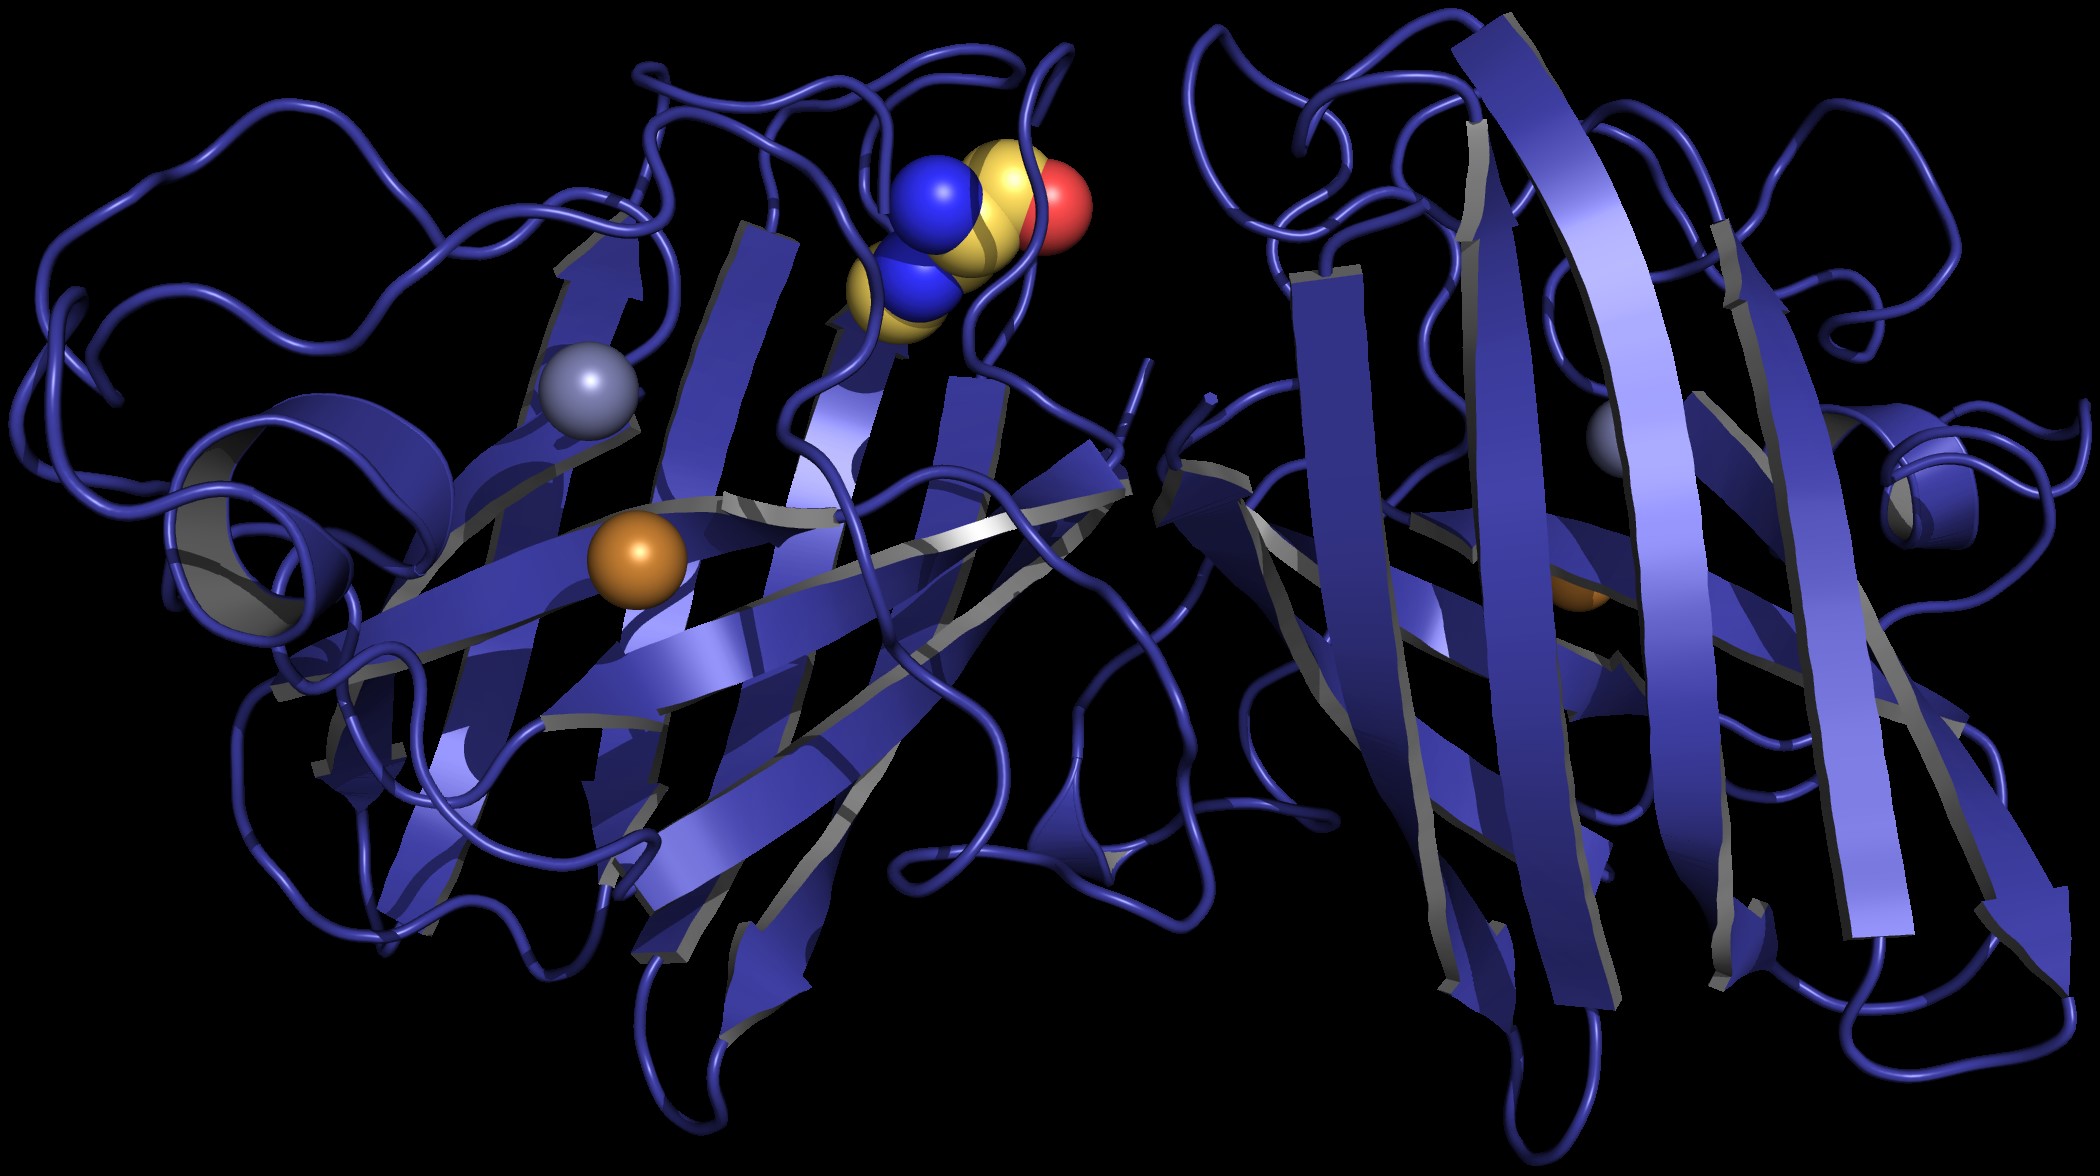 A computer-generated model of a protein